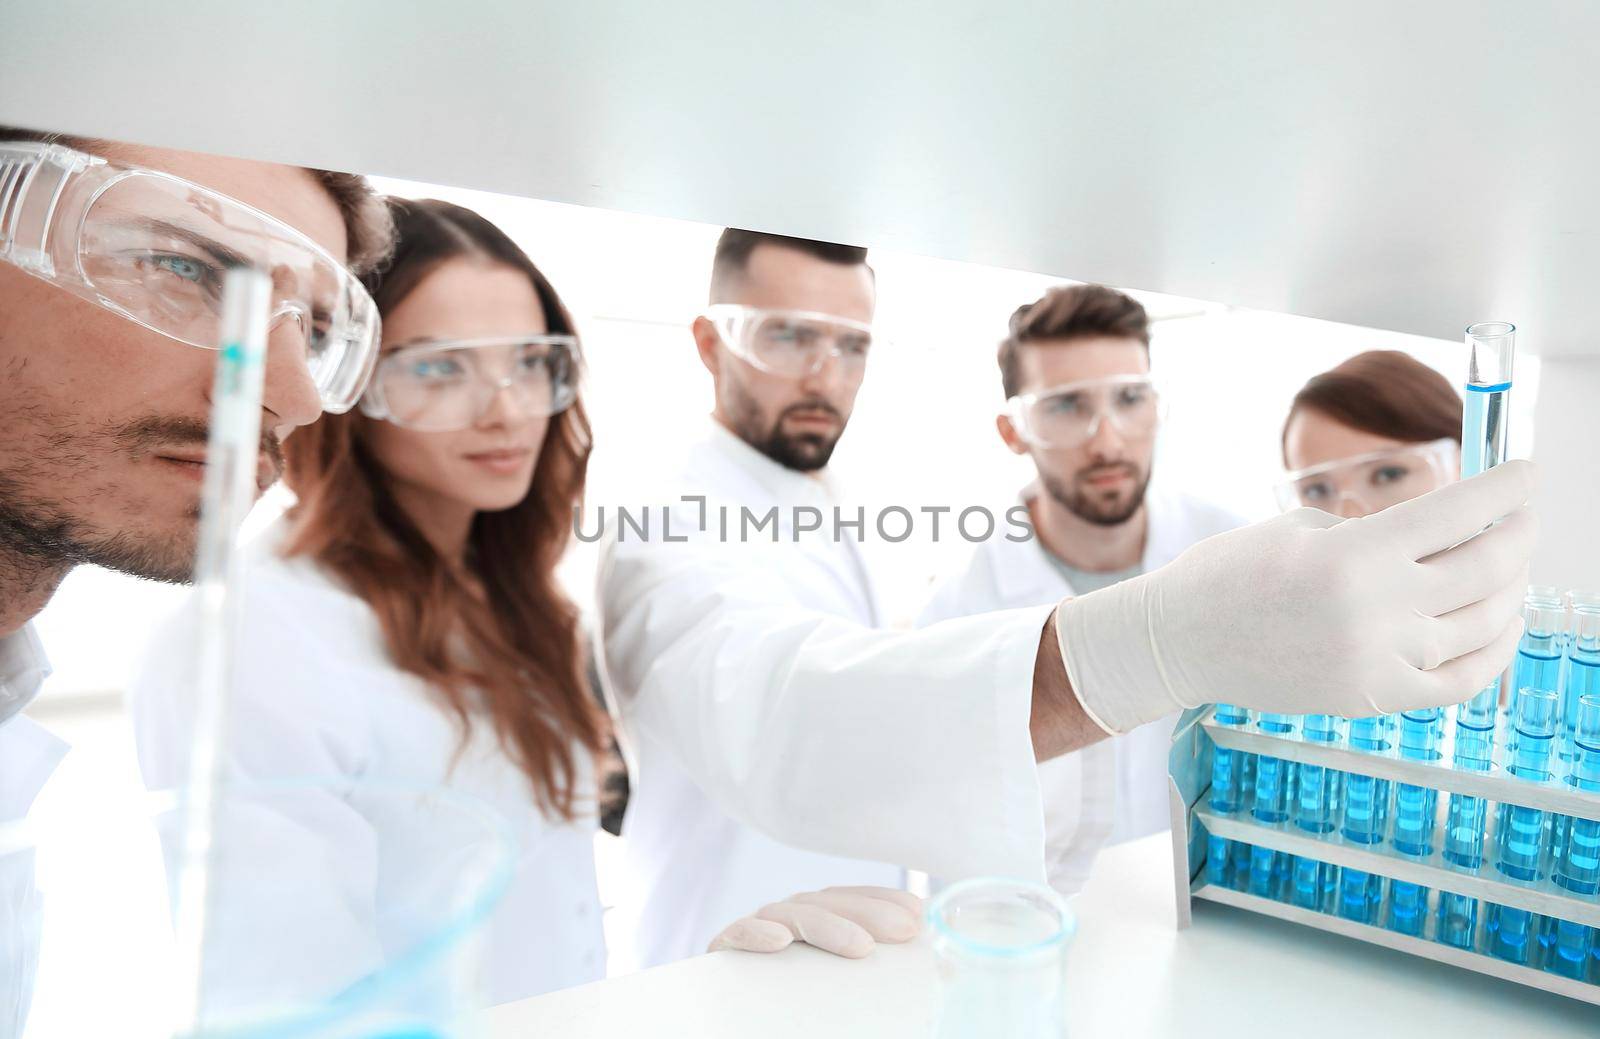 background image is a group of microbiologists studying the liquid in the glass tube. by asdf